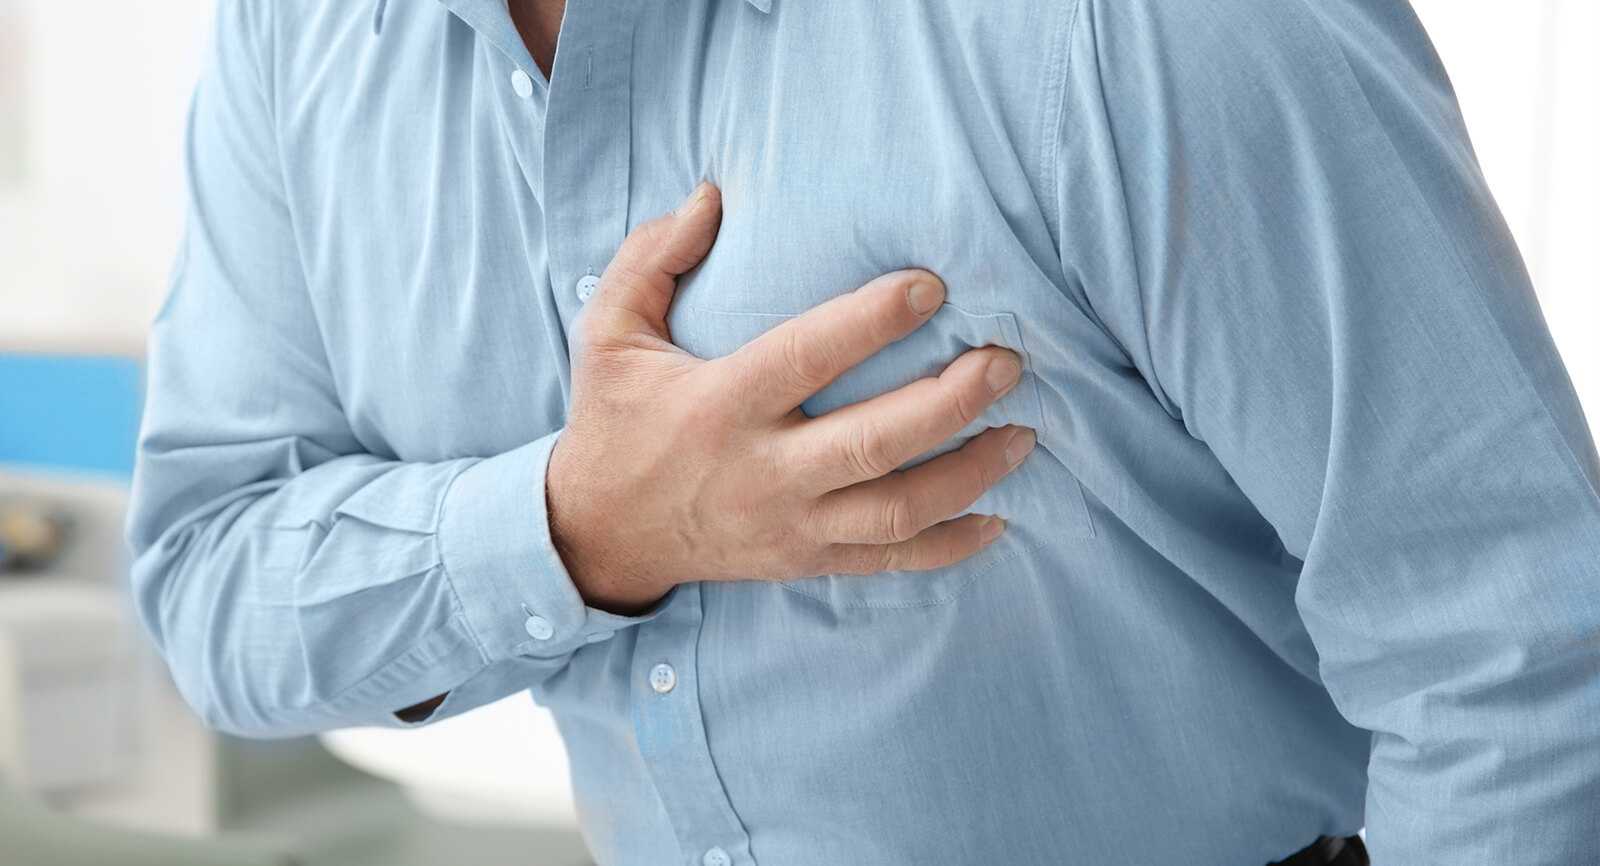 Signs Of A Heart Attack: Recognizing The Warning Signs And Taking Action